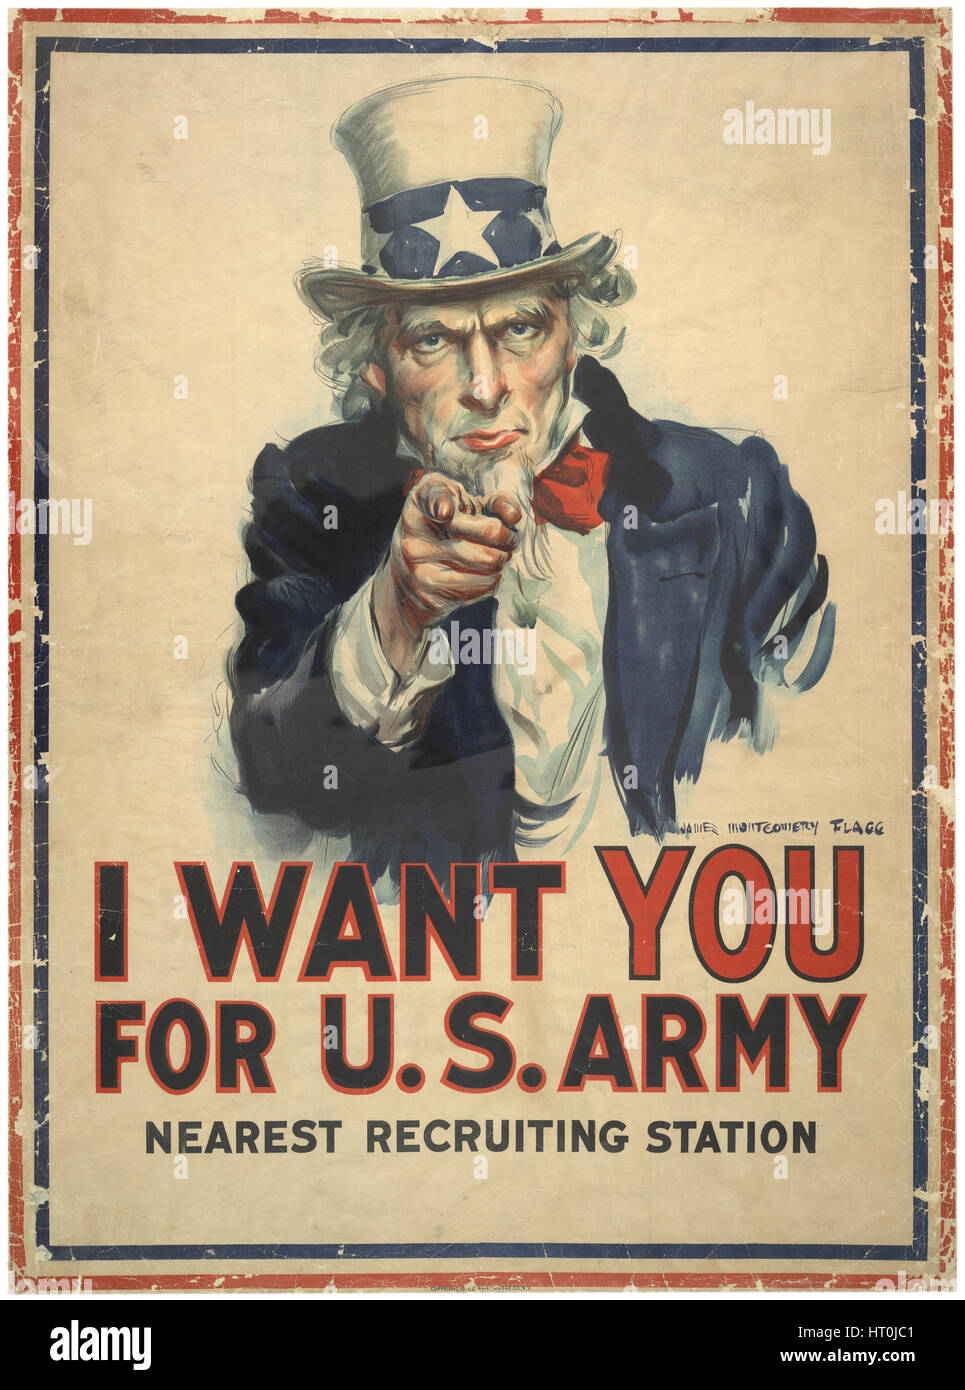 World War I recruiting poster for the the U.S. Army featuring Uncle Sam by artist James Montgomery Flag, c1917. Stock Photo